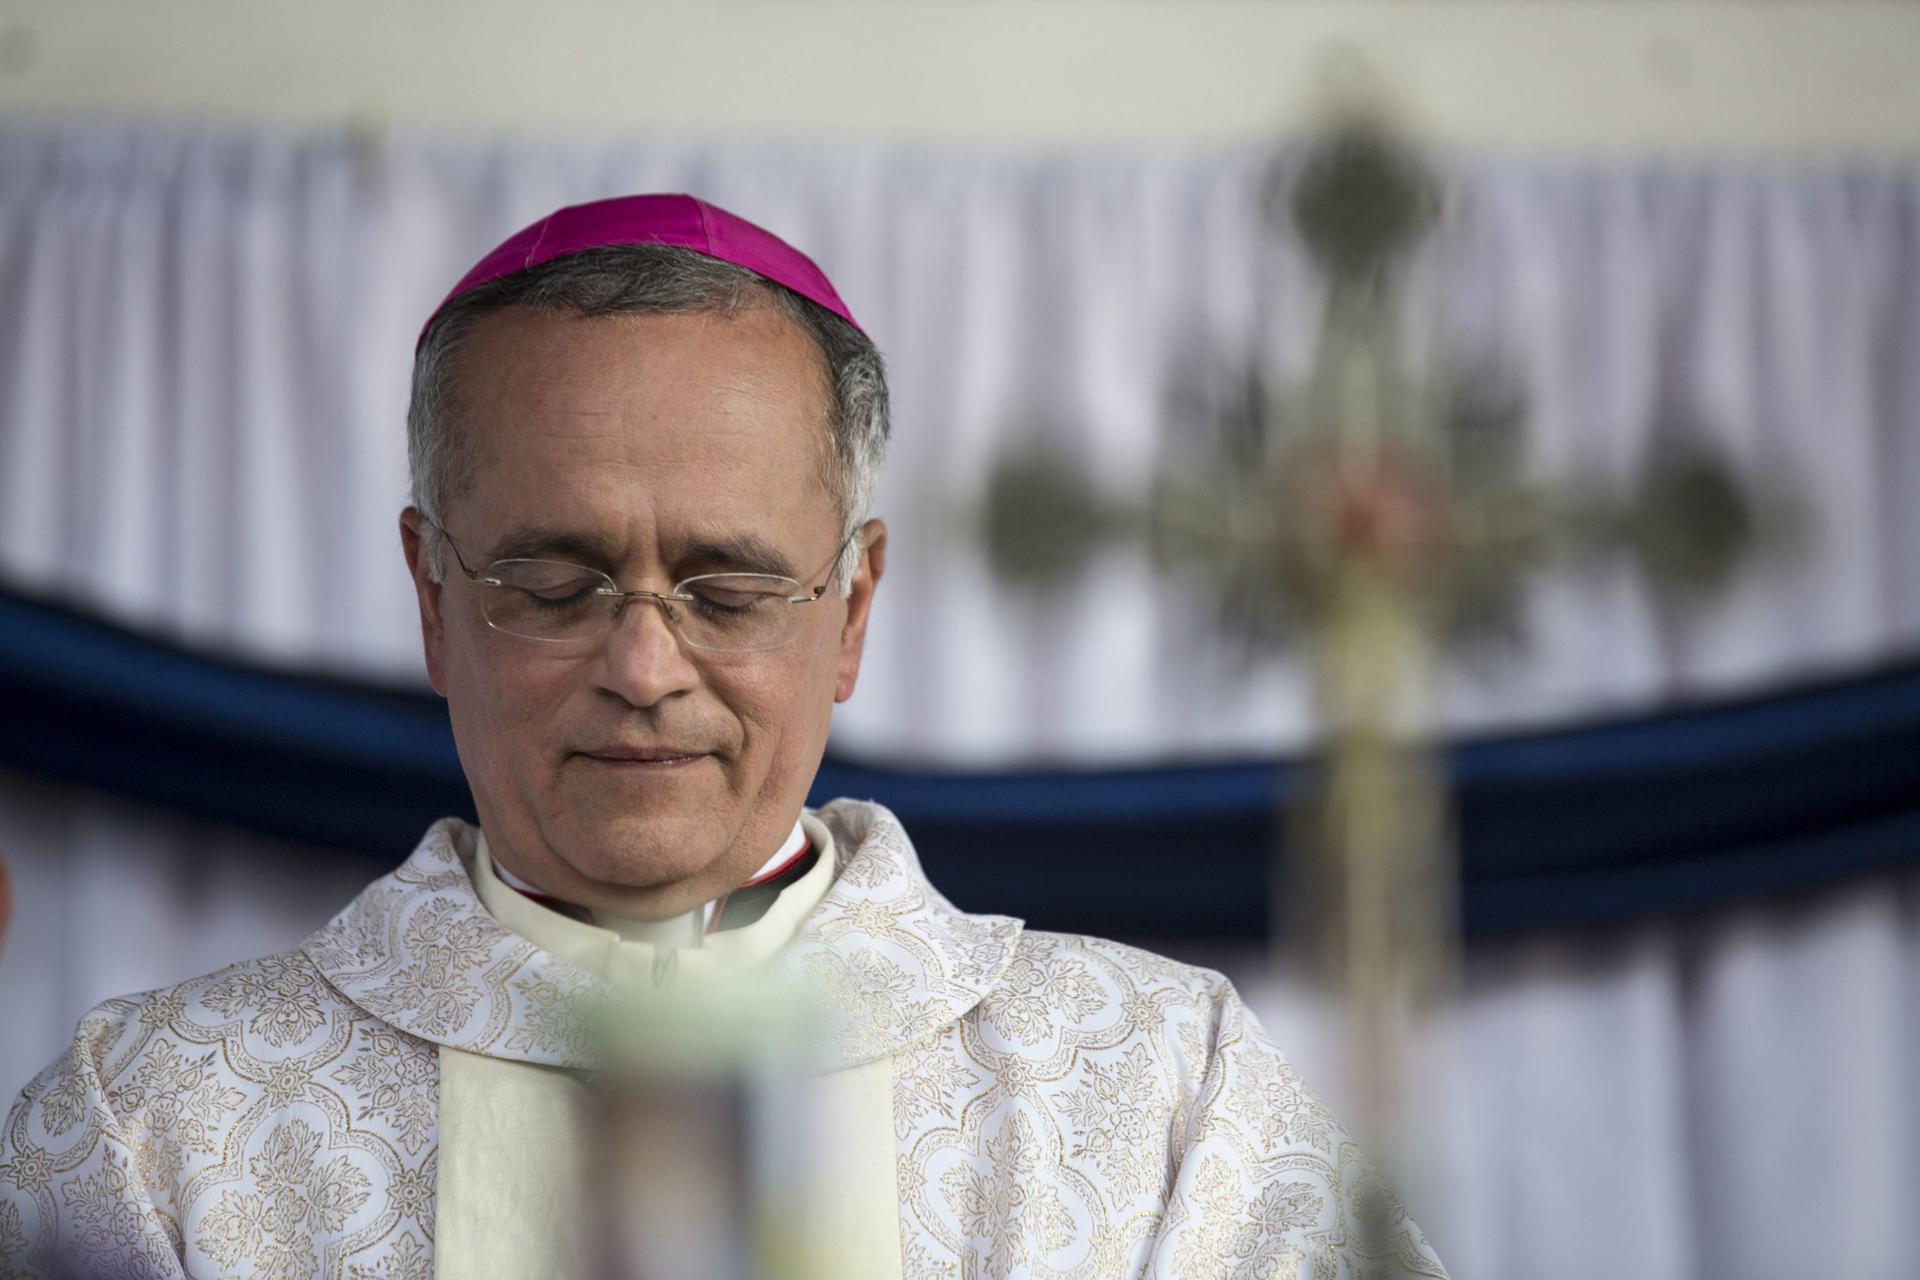 Bishop asks Nicaraguans to ‘fight for freedom’ in speech